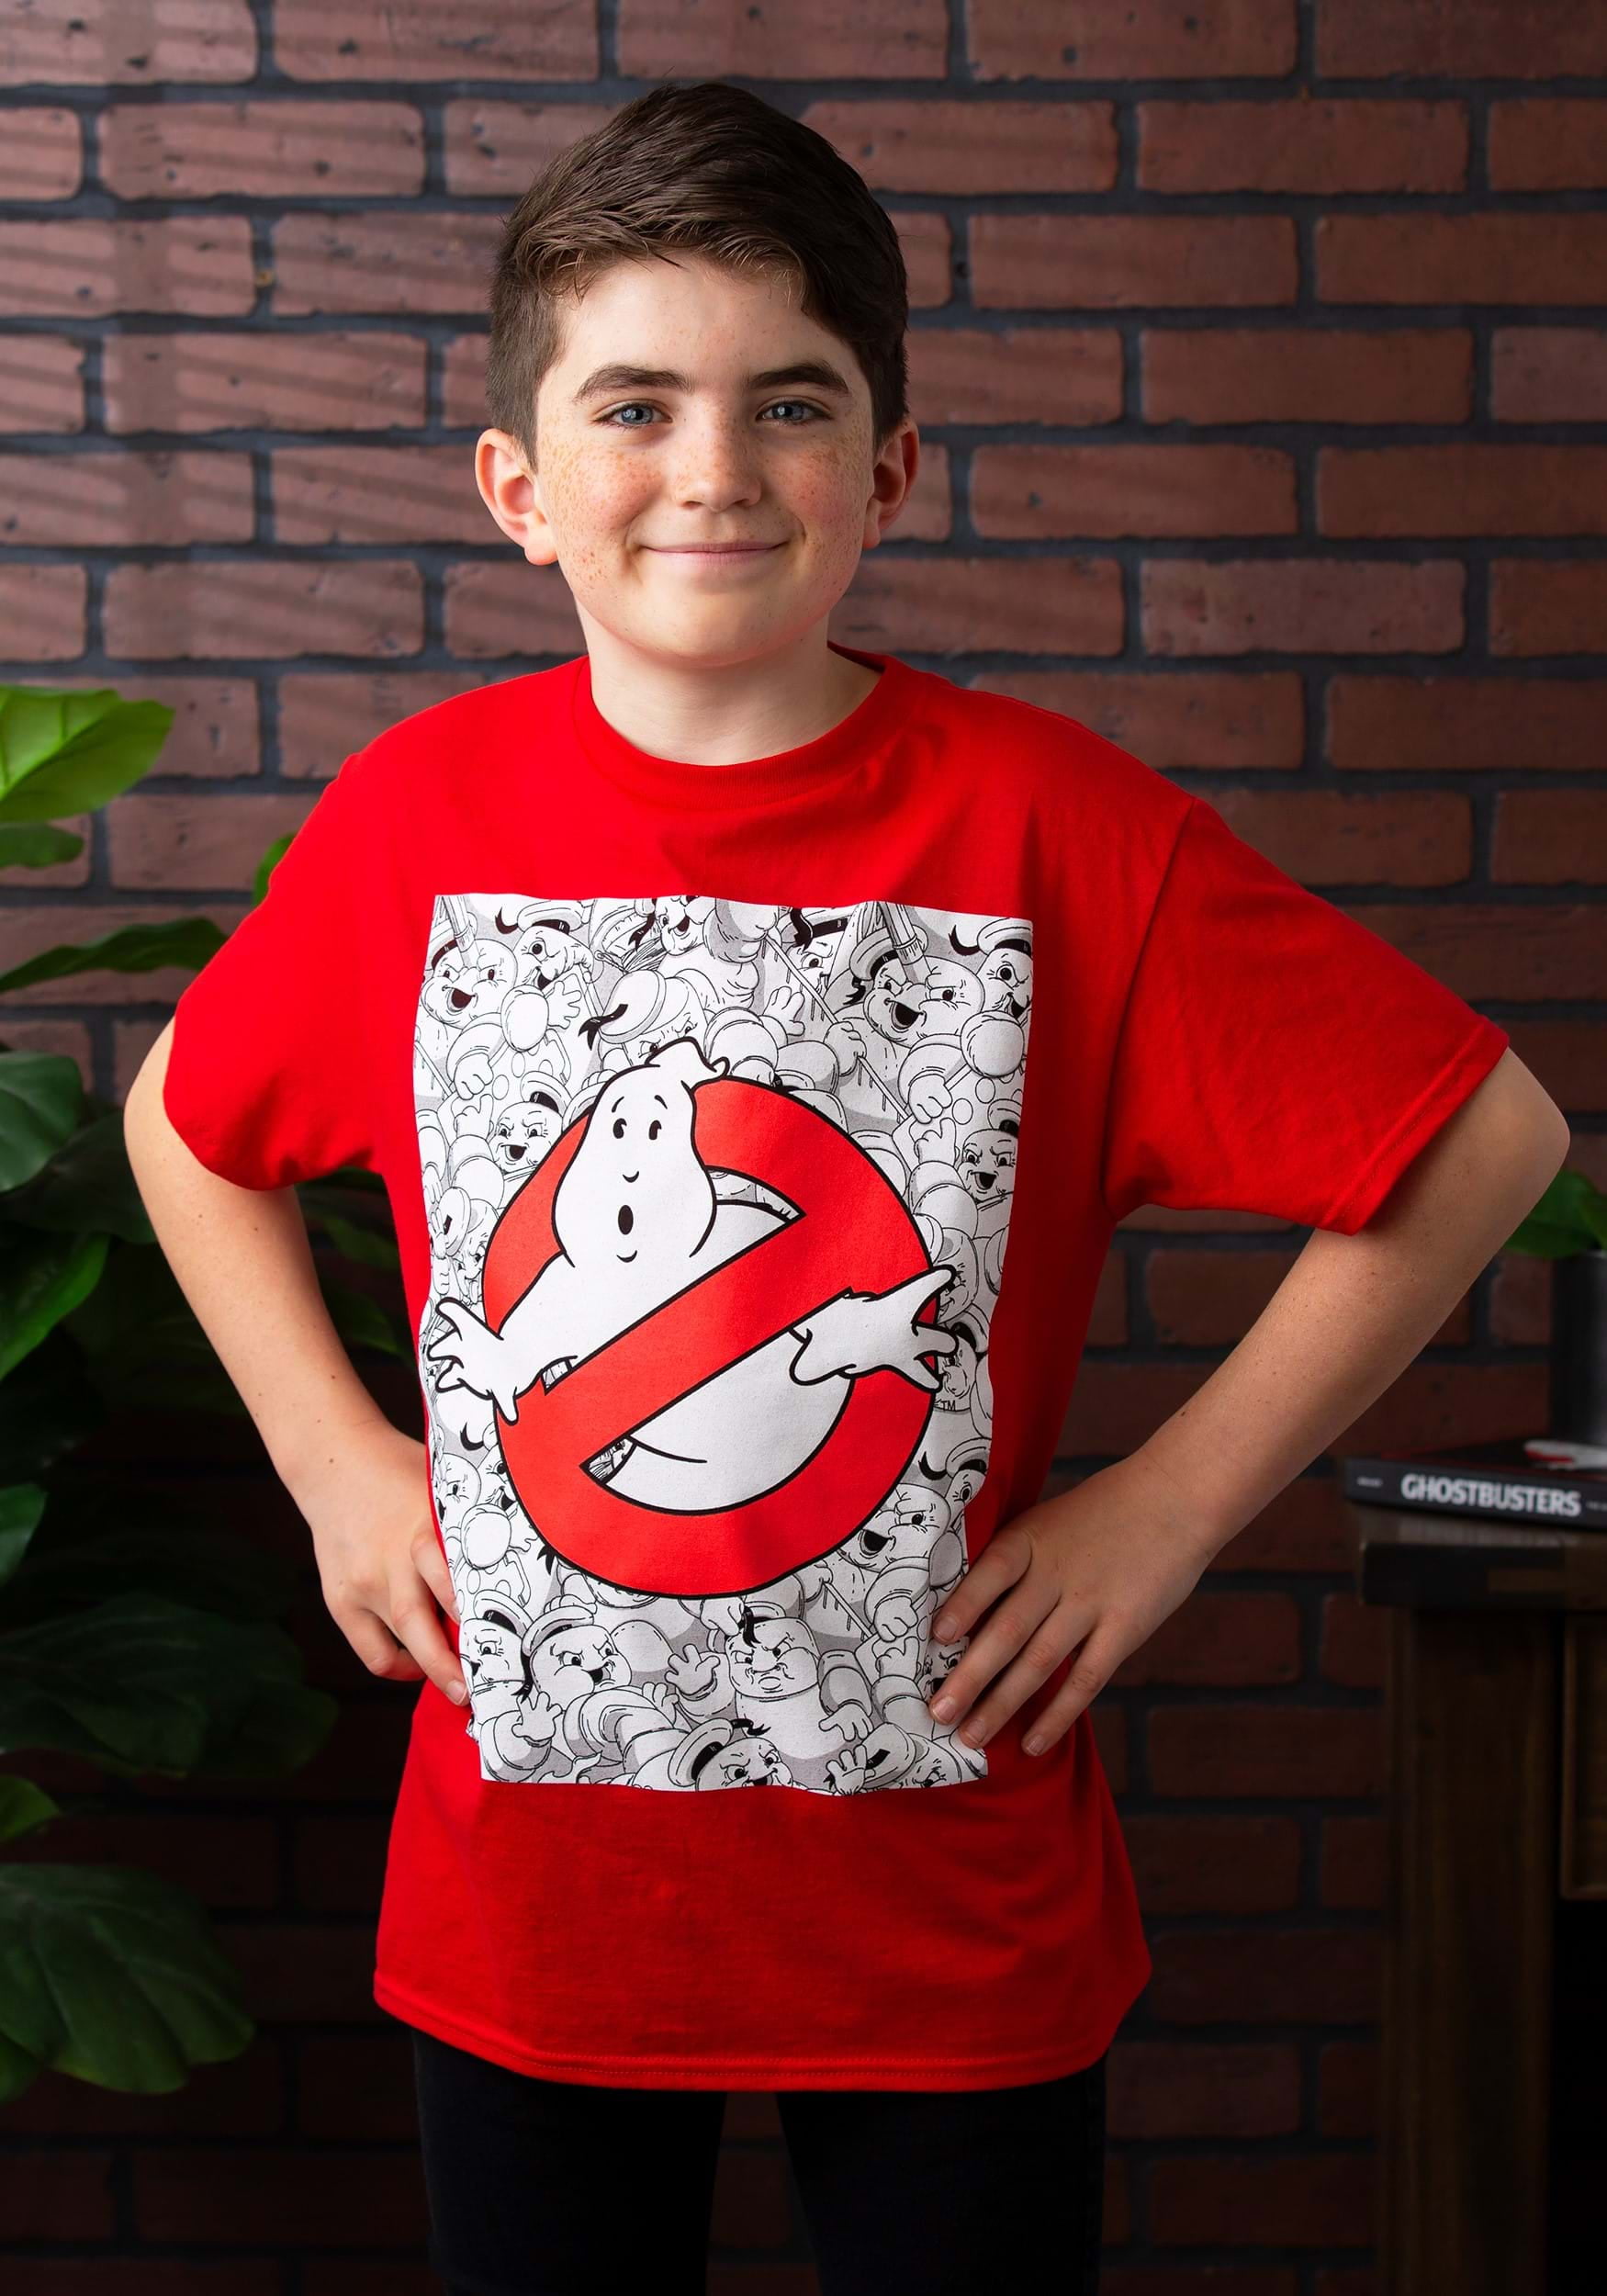 GHOSTBUSTERS GLOW IN THE DARK CLASSIC MOVIE T-SHIRT Boys all sizes KIDS 